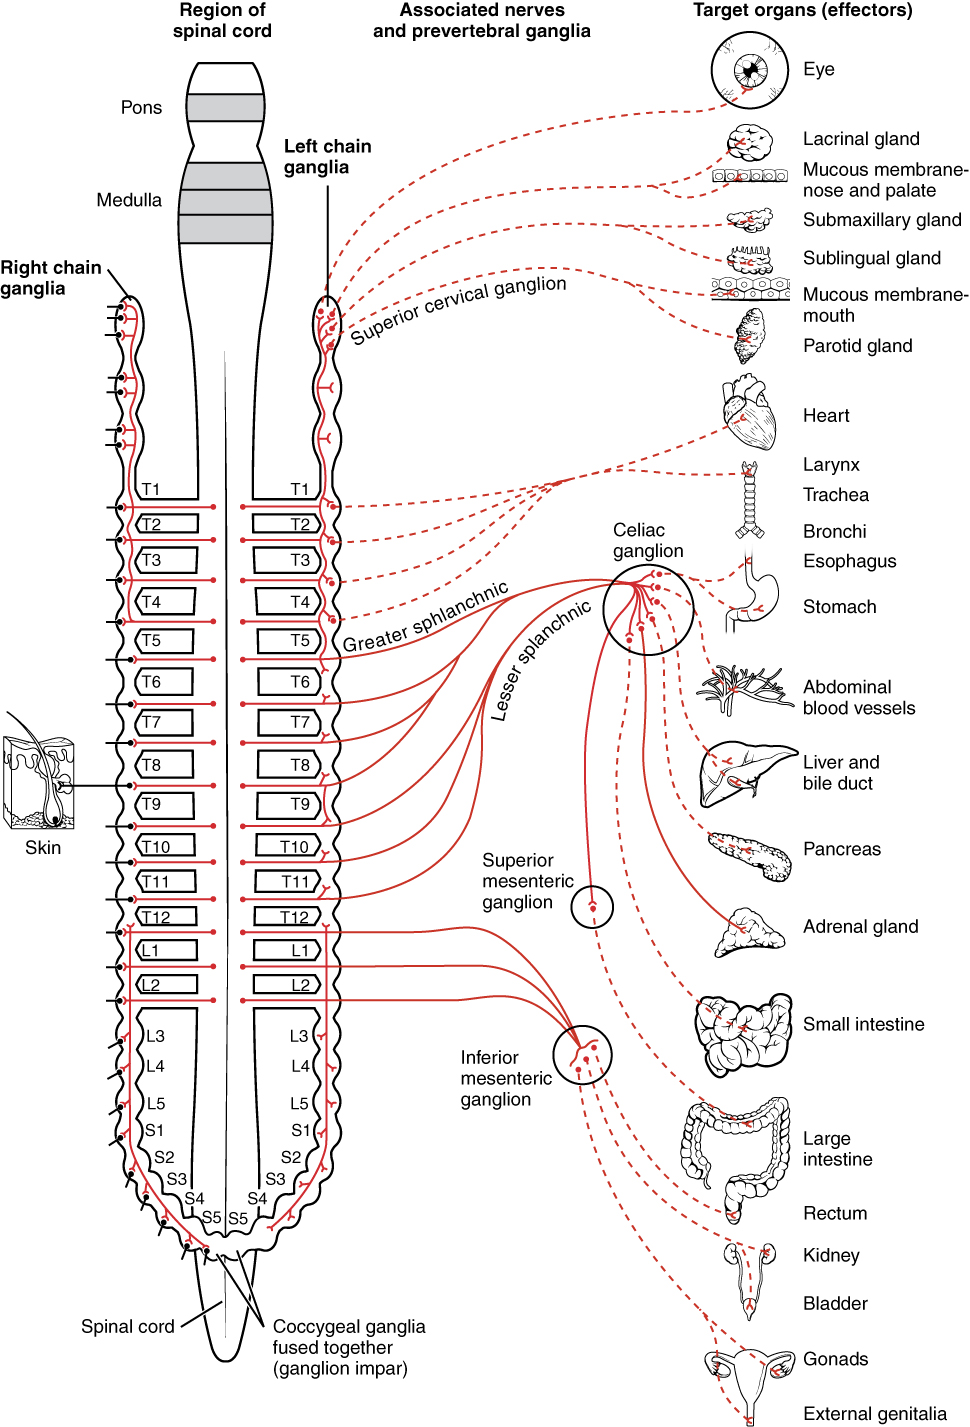 1501_Connections_of_the_Sympathetic_Nervous_System.jpg